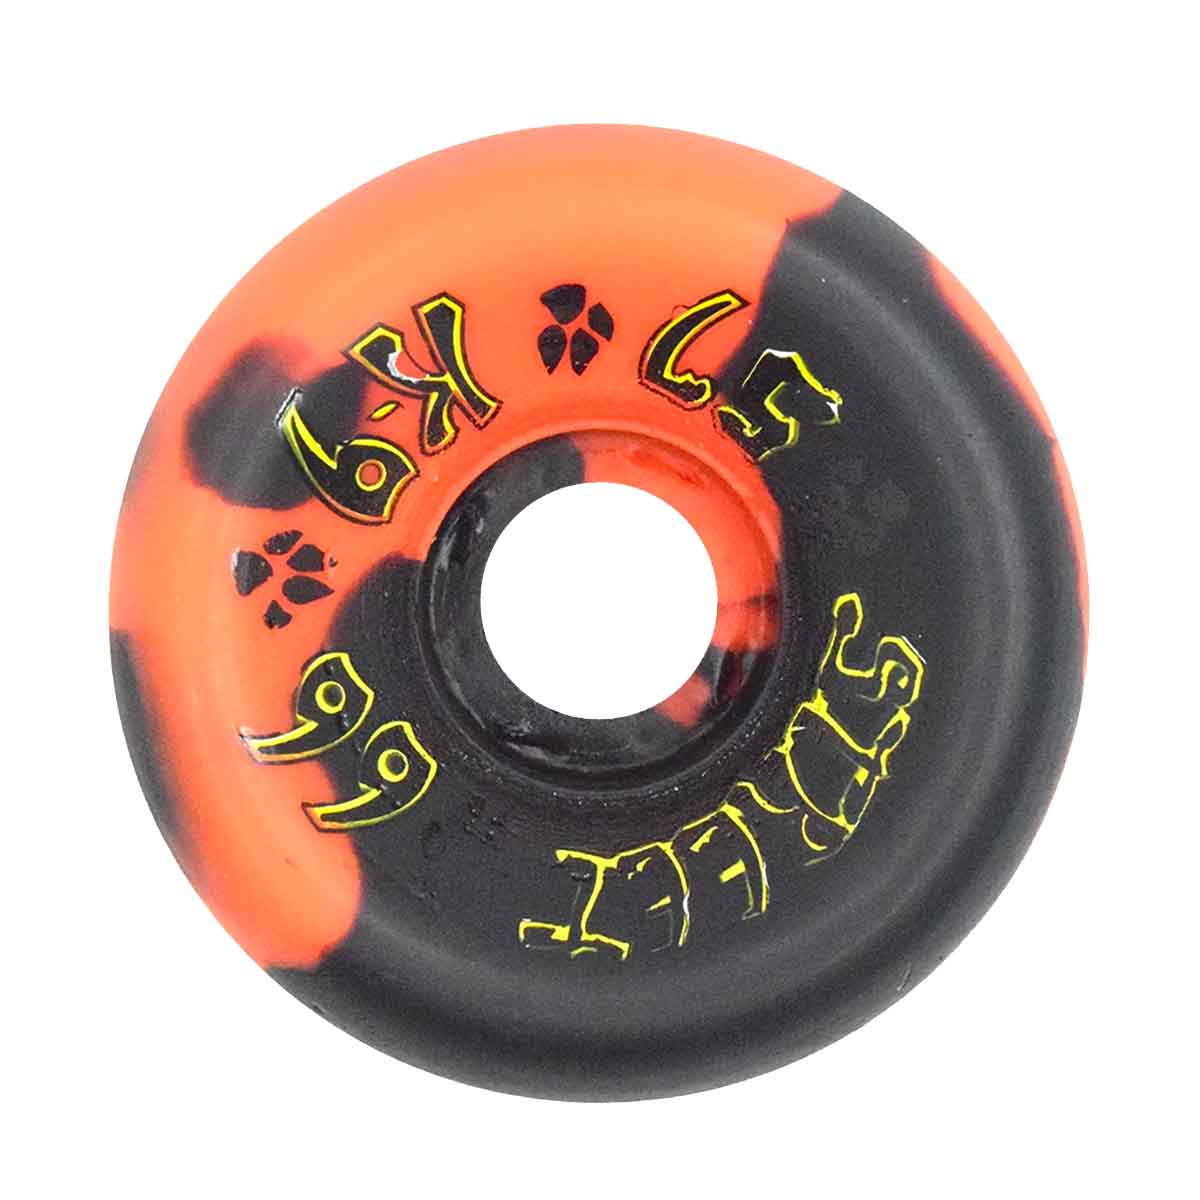 Details about   Blank Wheels/Skateboard Wheels Orange 50mm 99a show original title Set 4 Pieces Black Made in USA! 